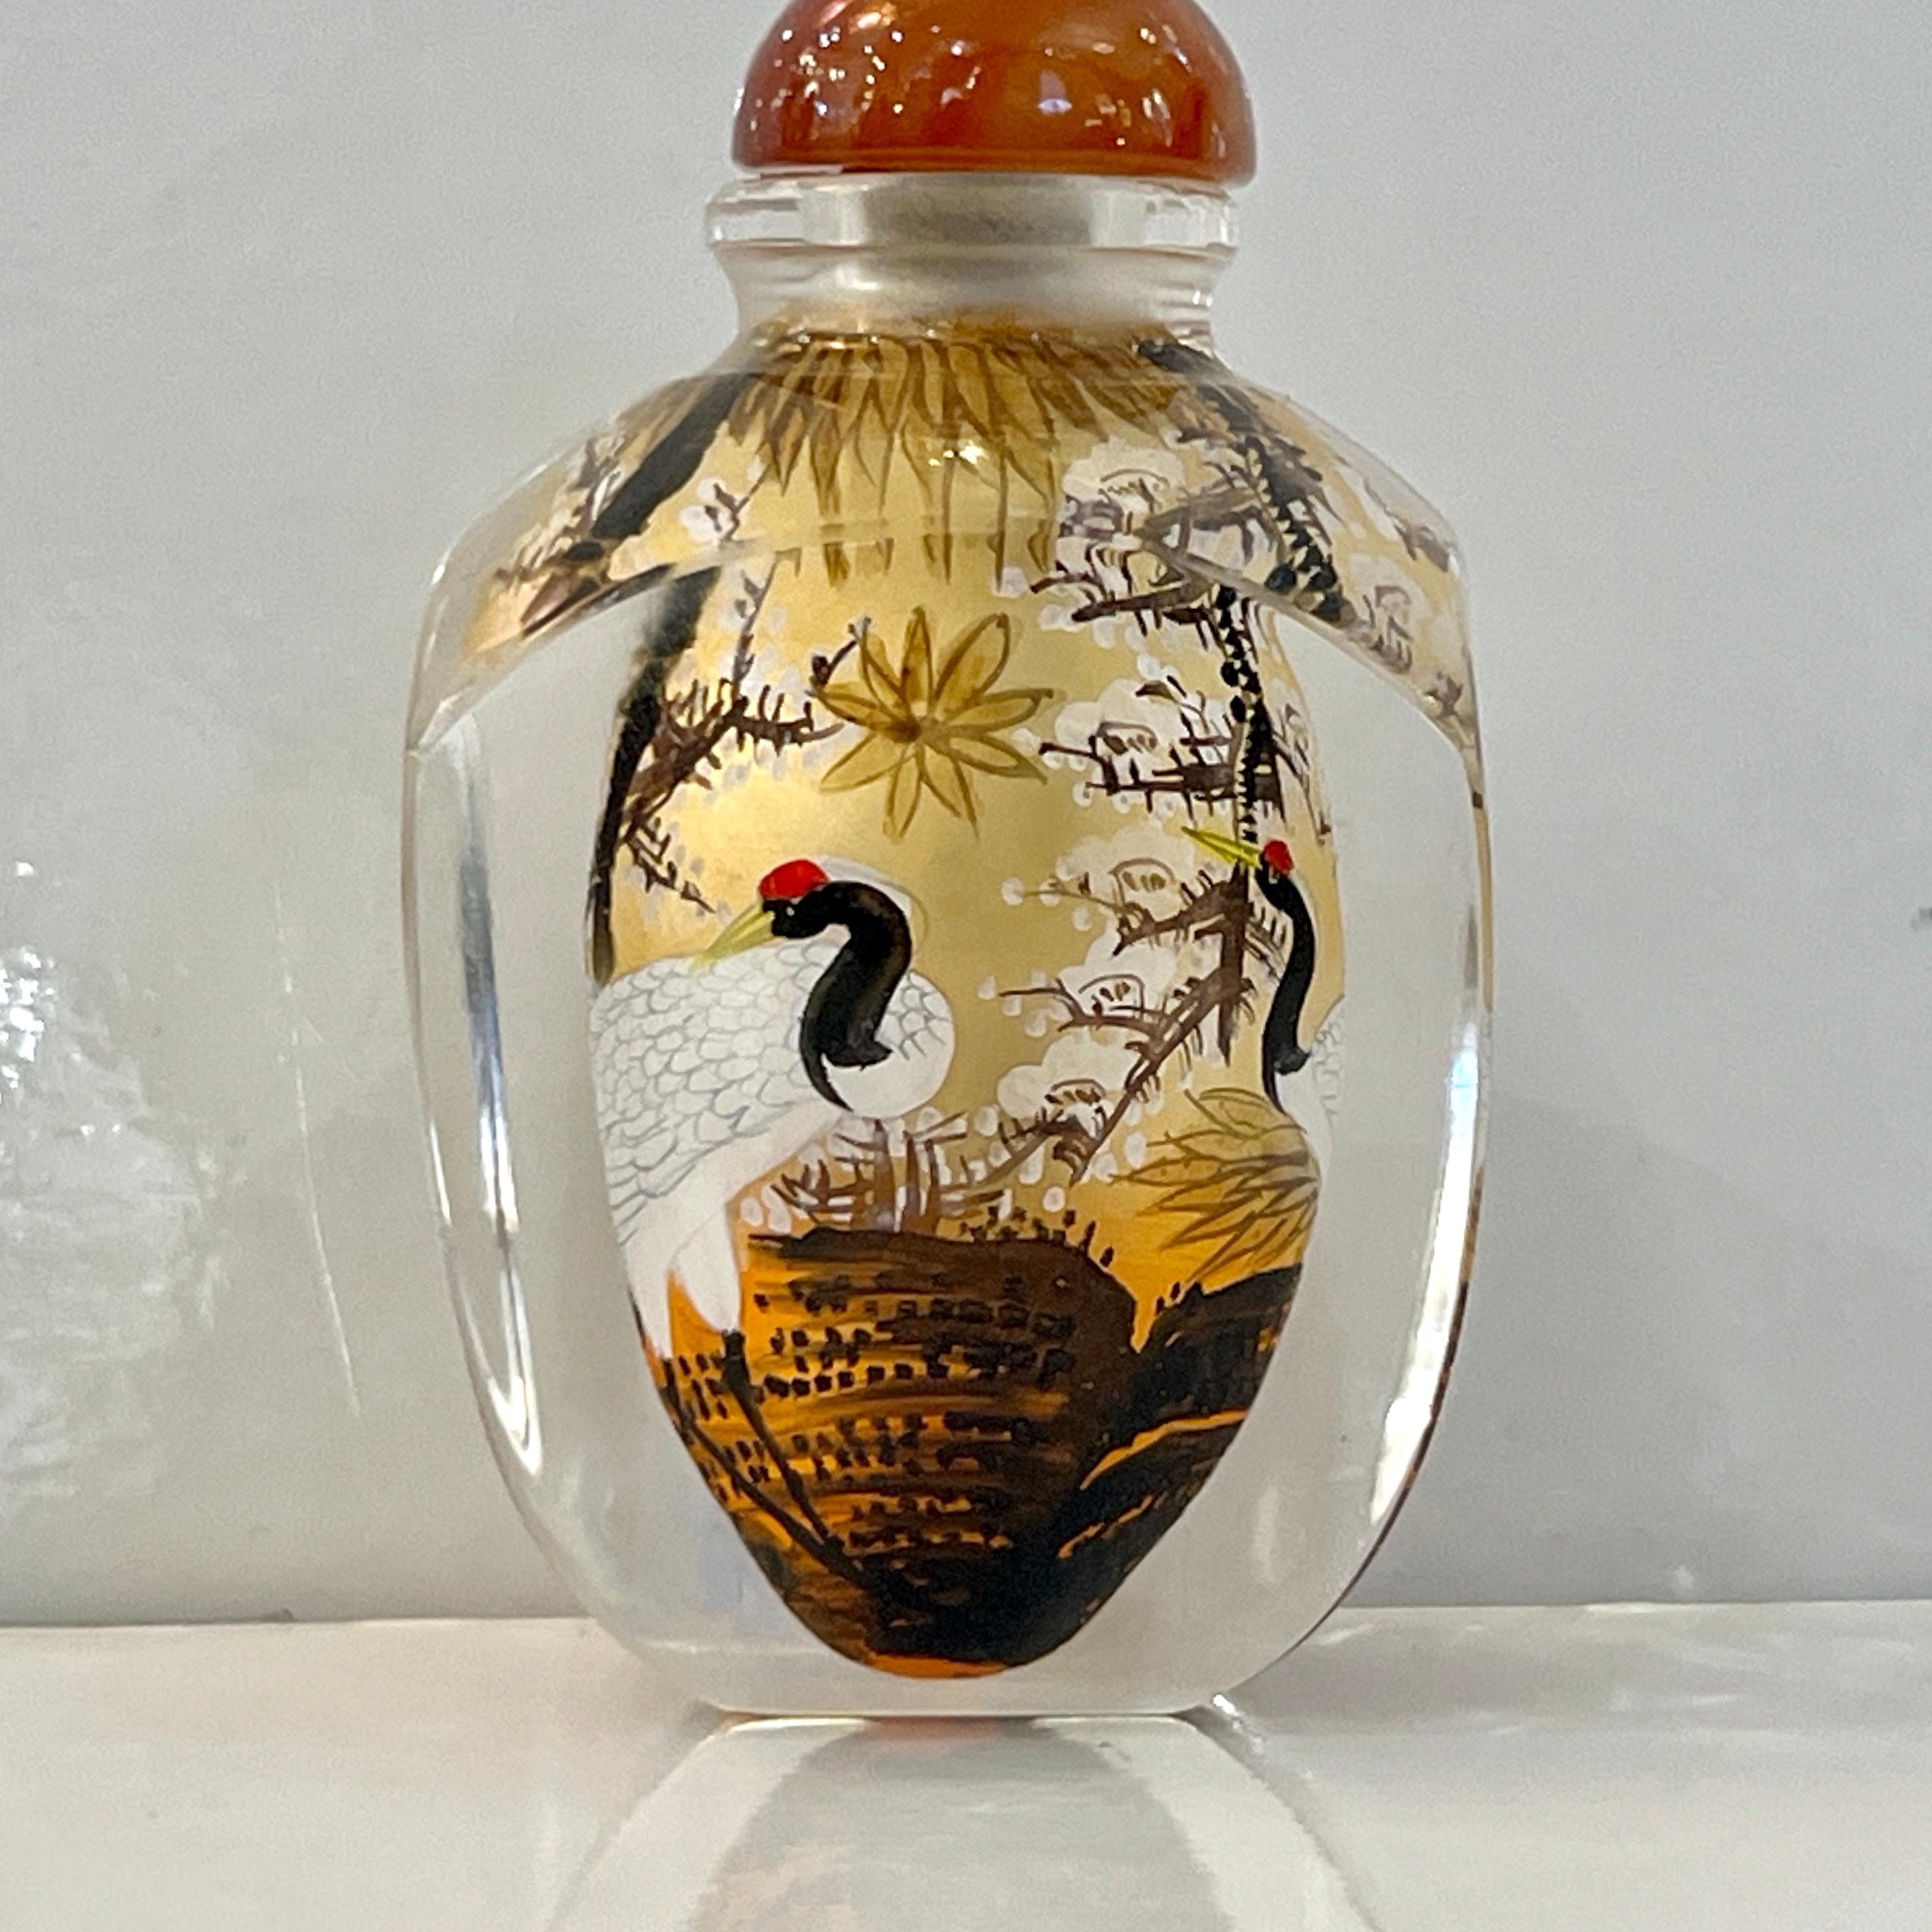 A delightful églomisé reverse-painted Chinese decorative snuff bottle, with a captivating scene depicting a landscape with white blossom trees and red-crowned white and black cranes delicately free hand painted in the foreground, with symbolic